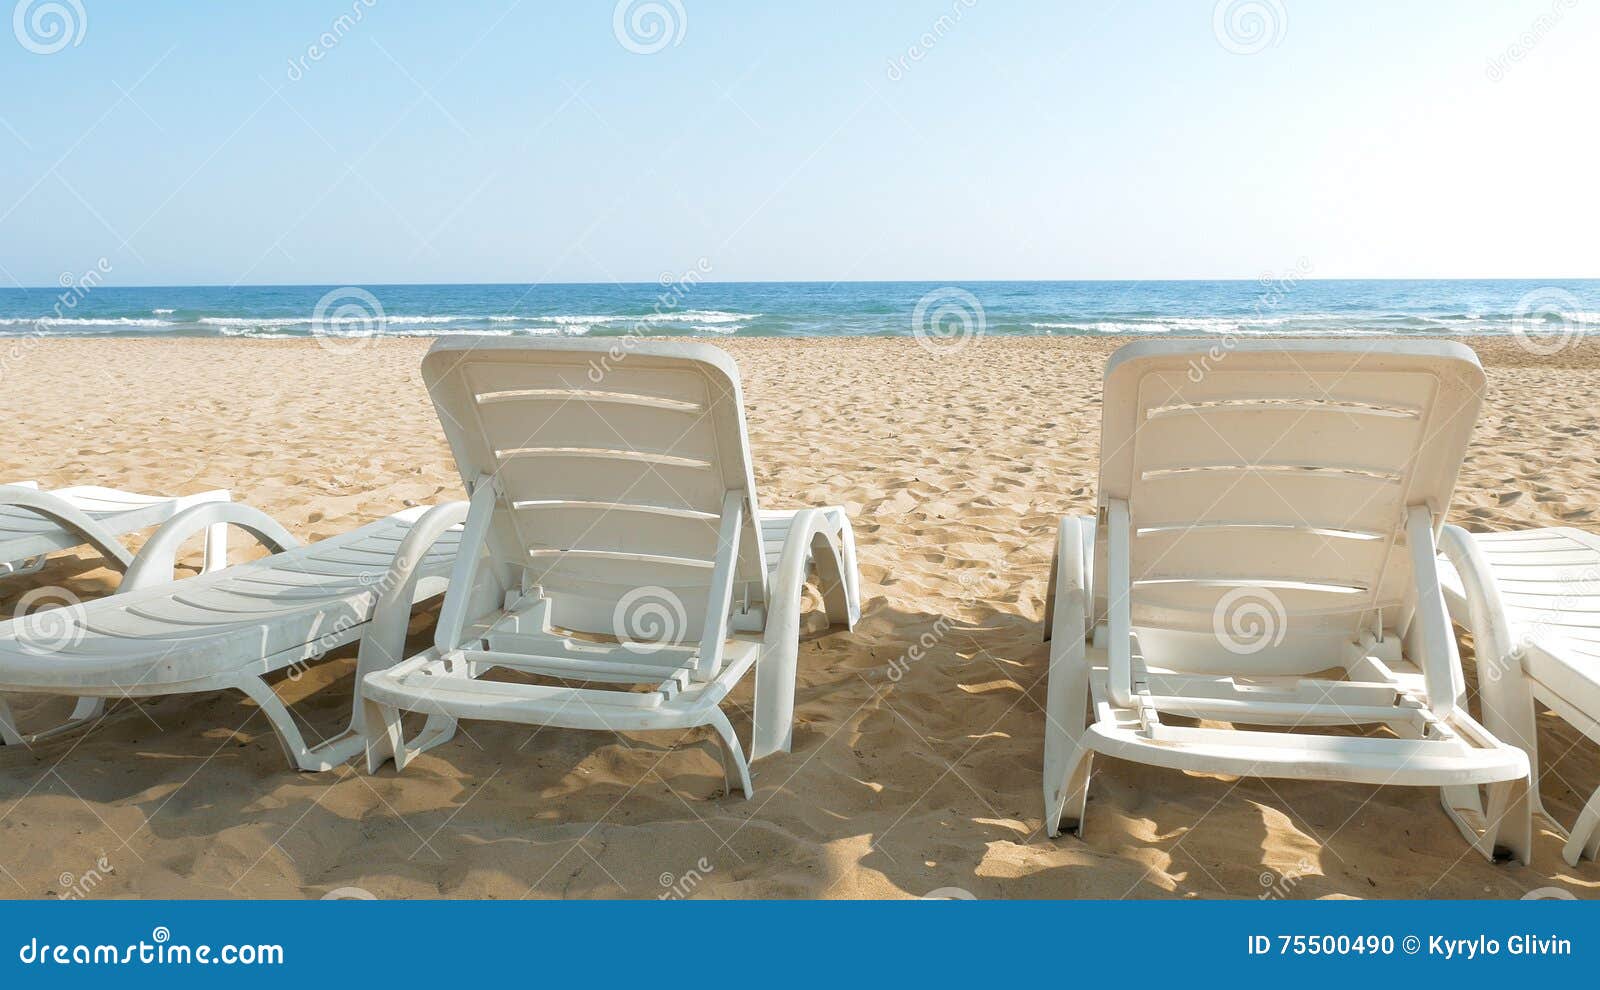 White Beach Chairs And Beds Near Sea Ocean Shore Stock Photo